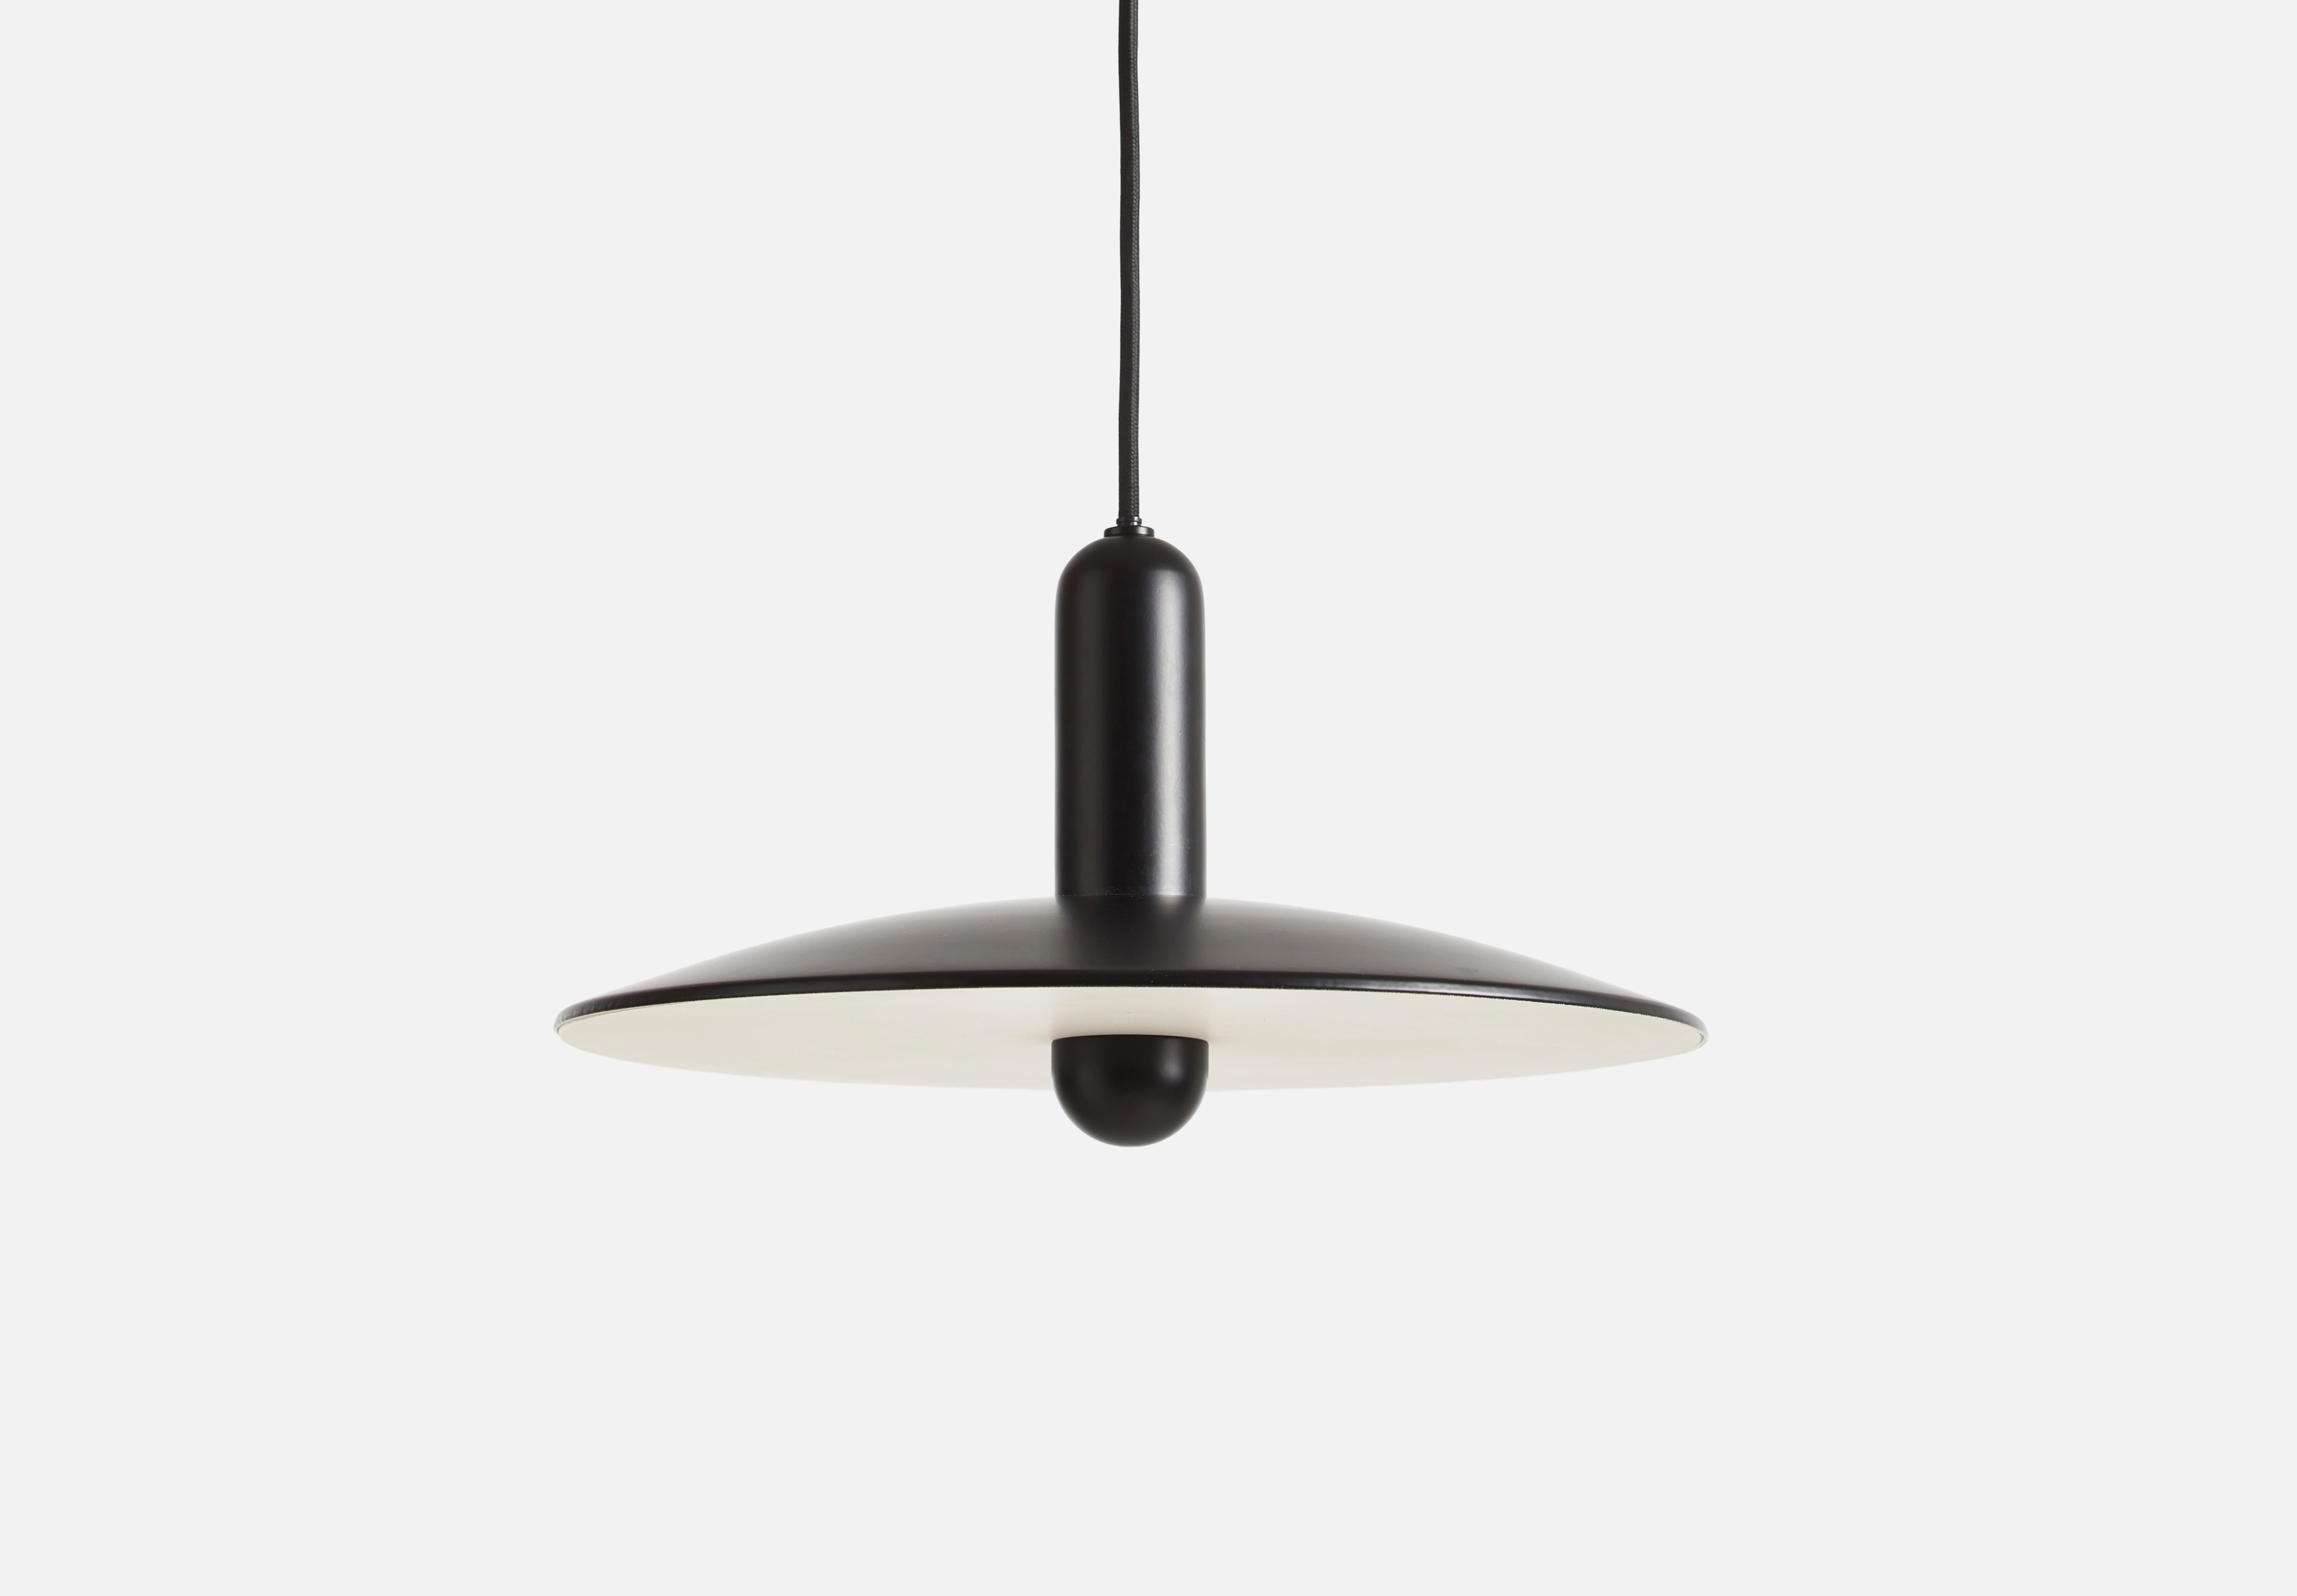 Small black Lu pendant lamp by Beaverhausen
Materials: Metal.
Dimensions: D 33 x H 22 cm
Available in black or taupe and in 2 sizes: D 33, D 45 cm.

Beaverhausen is a Brussels-based design studio founded by Mimy A. Diar and Ad Luijten. Both